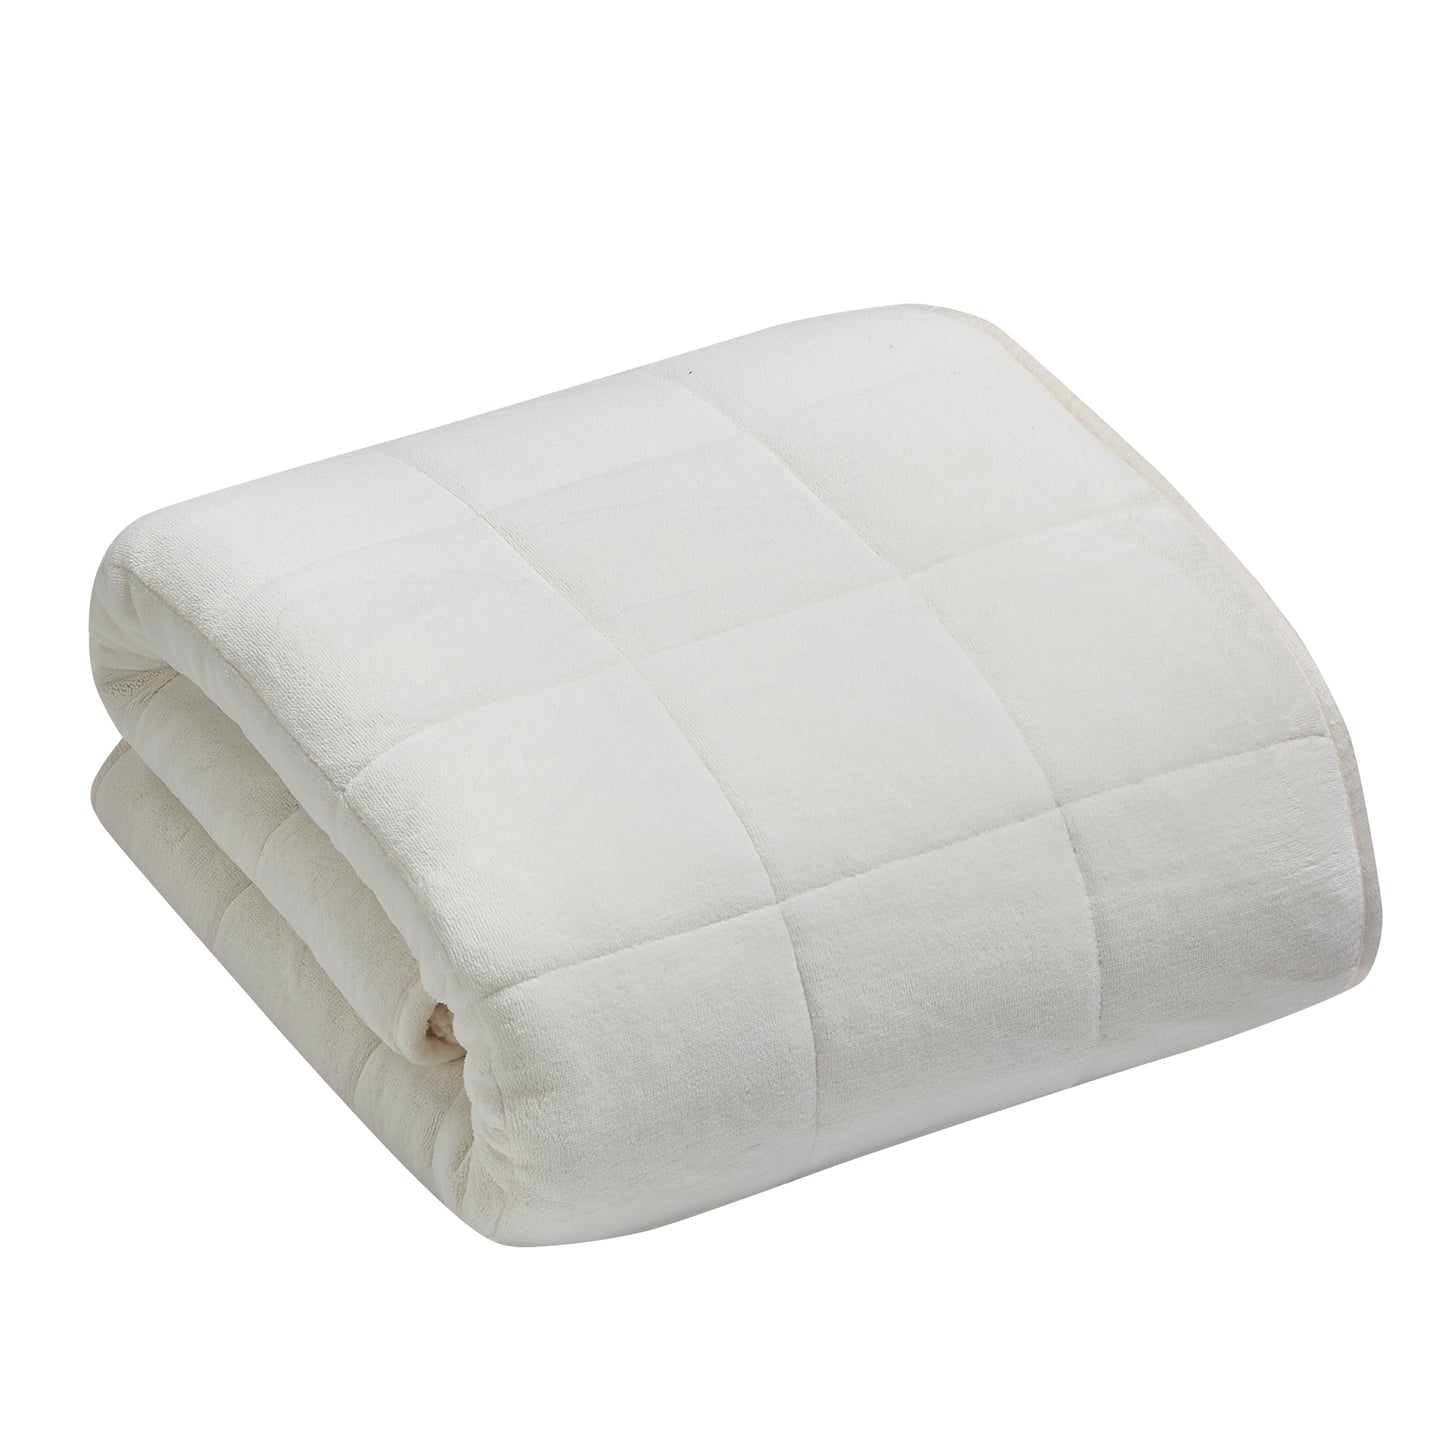 Weighted Blanket with Premium Glass Beads 10lbs - Ivory